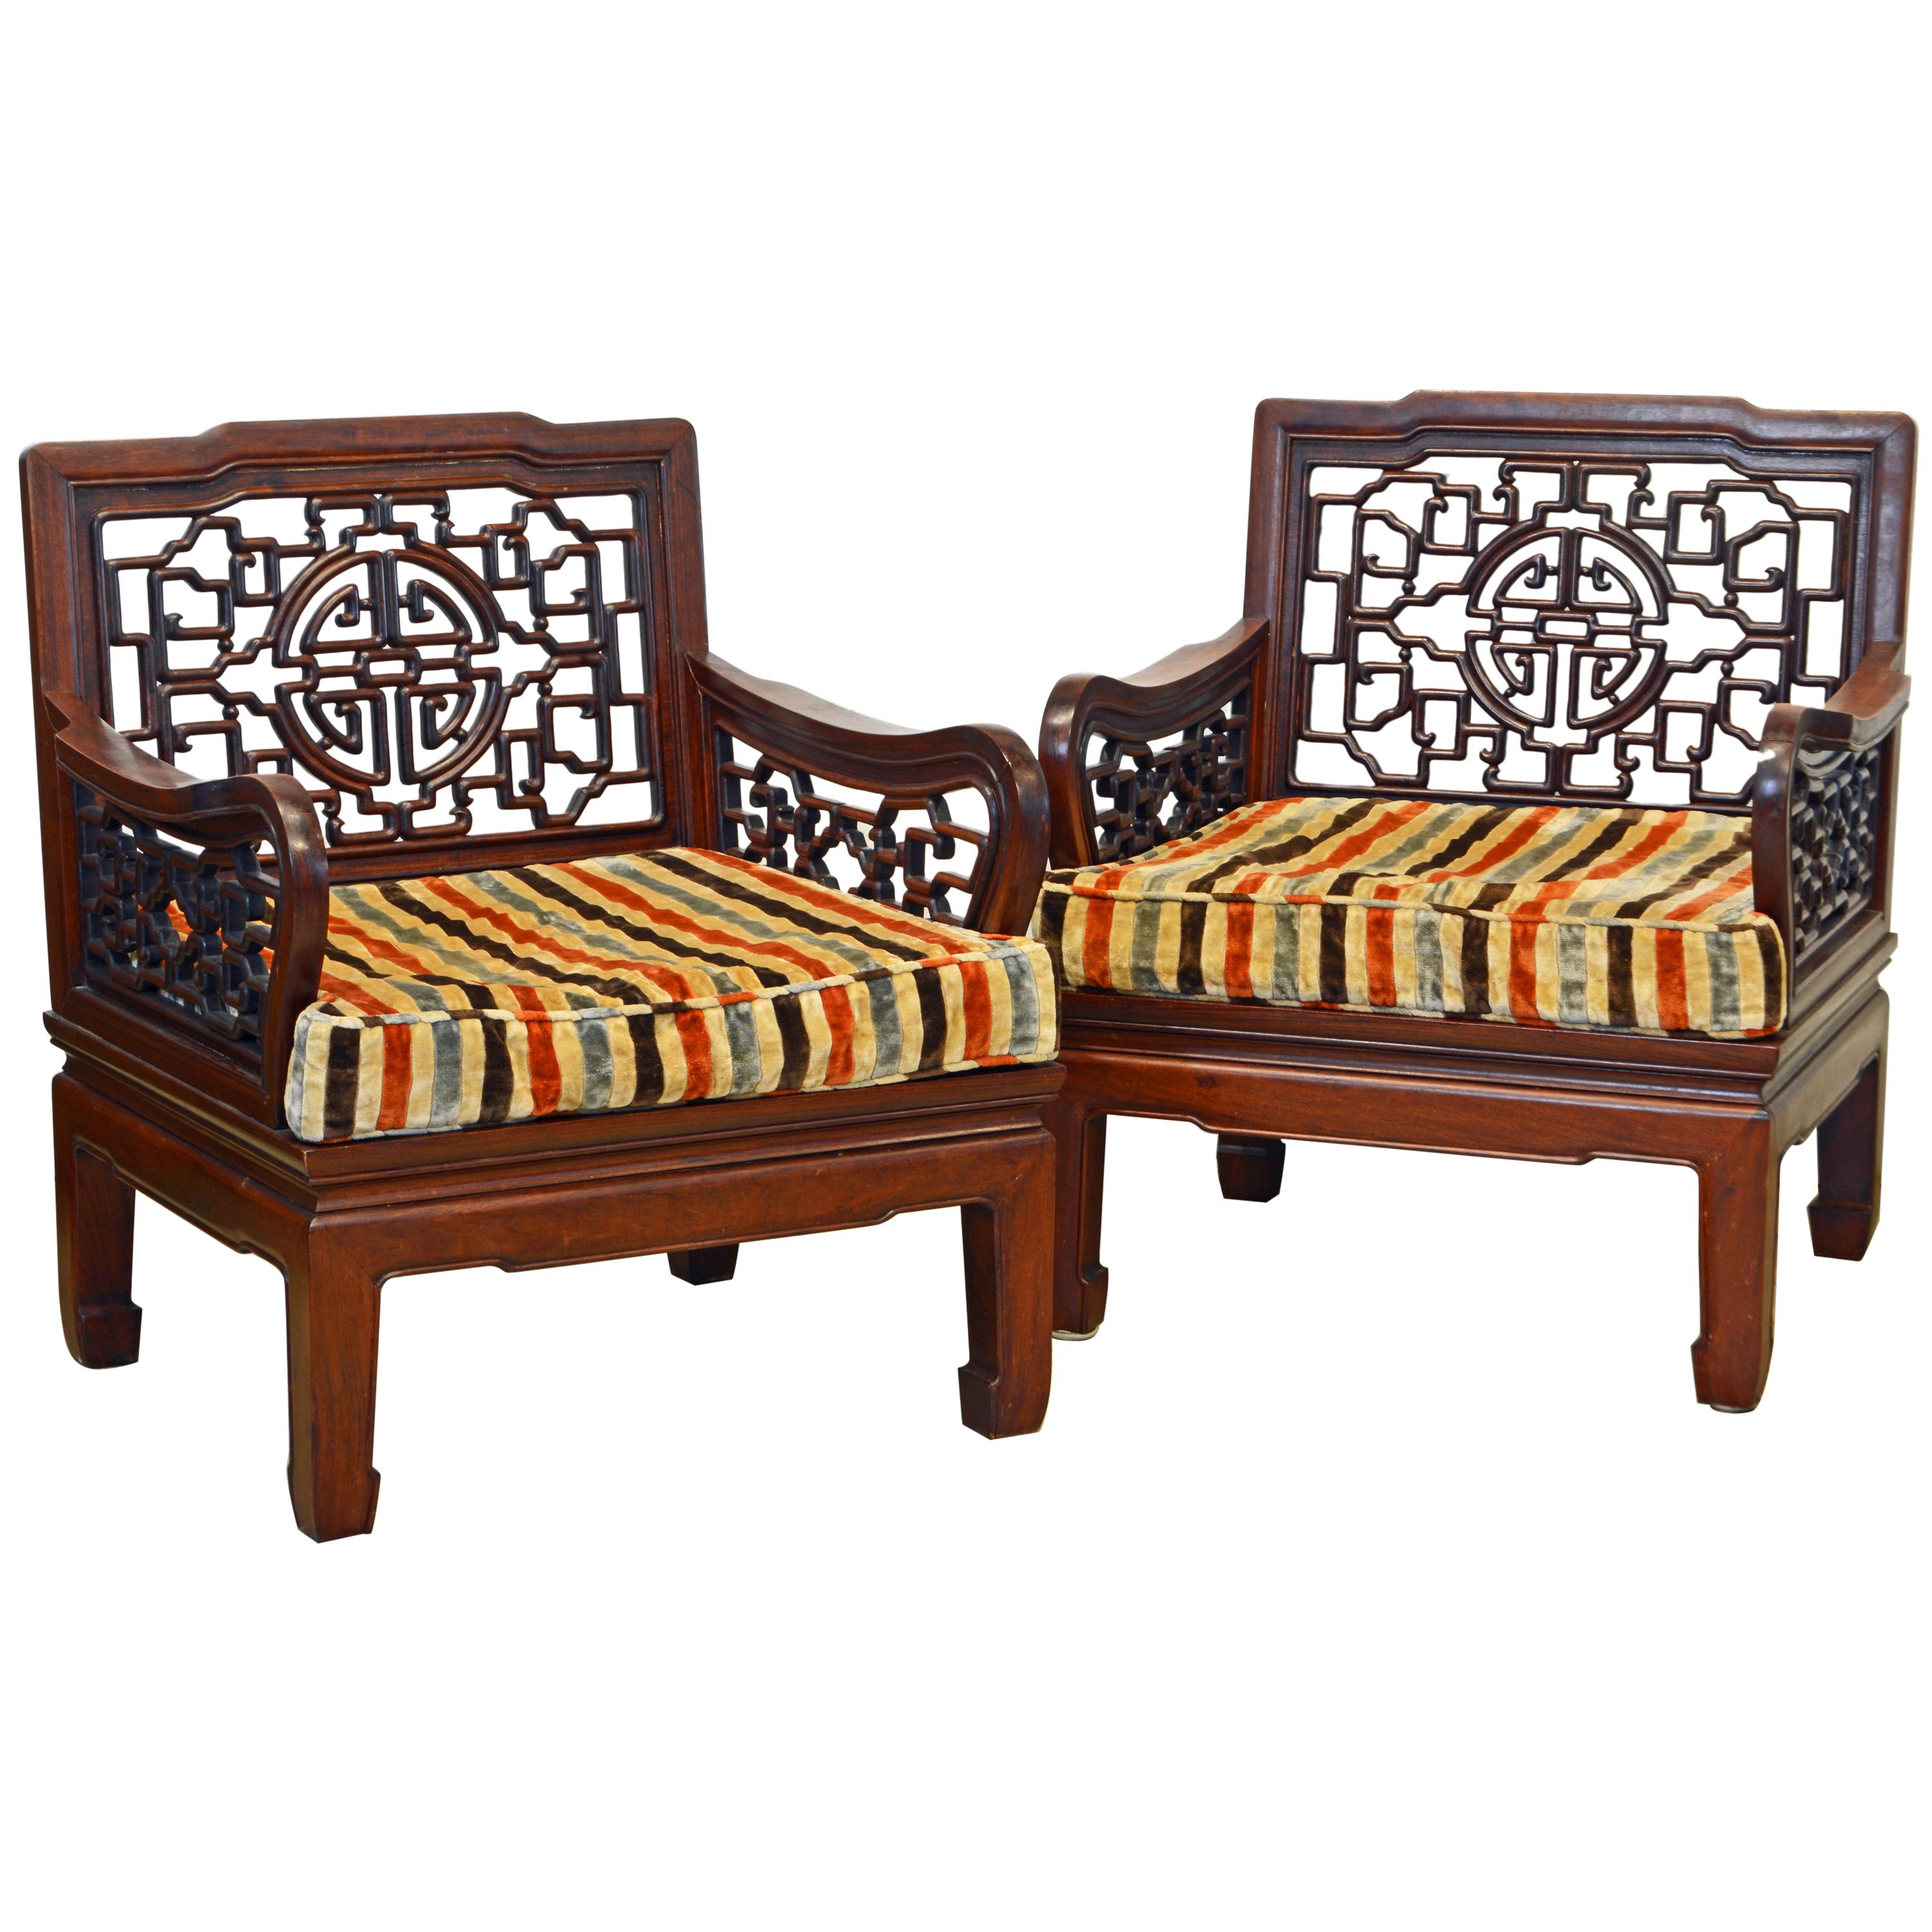 Pair of Chinese Carved Mahogany Ming Style Low Club or Lounge Chairs, circa 1940